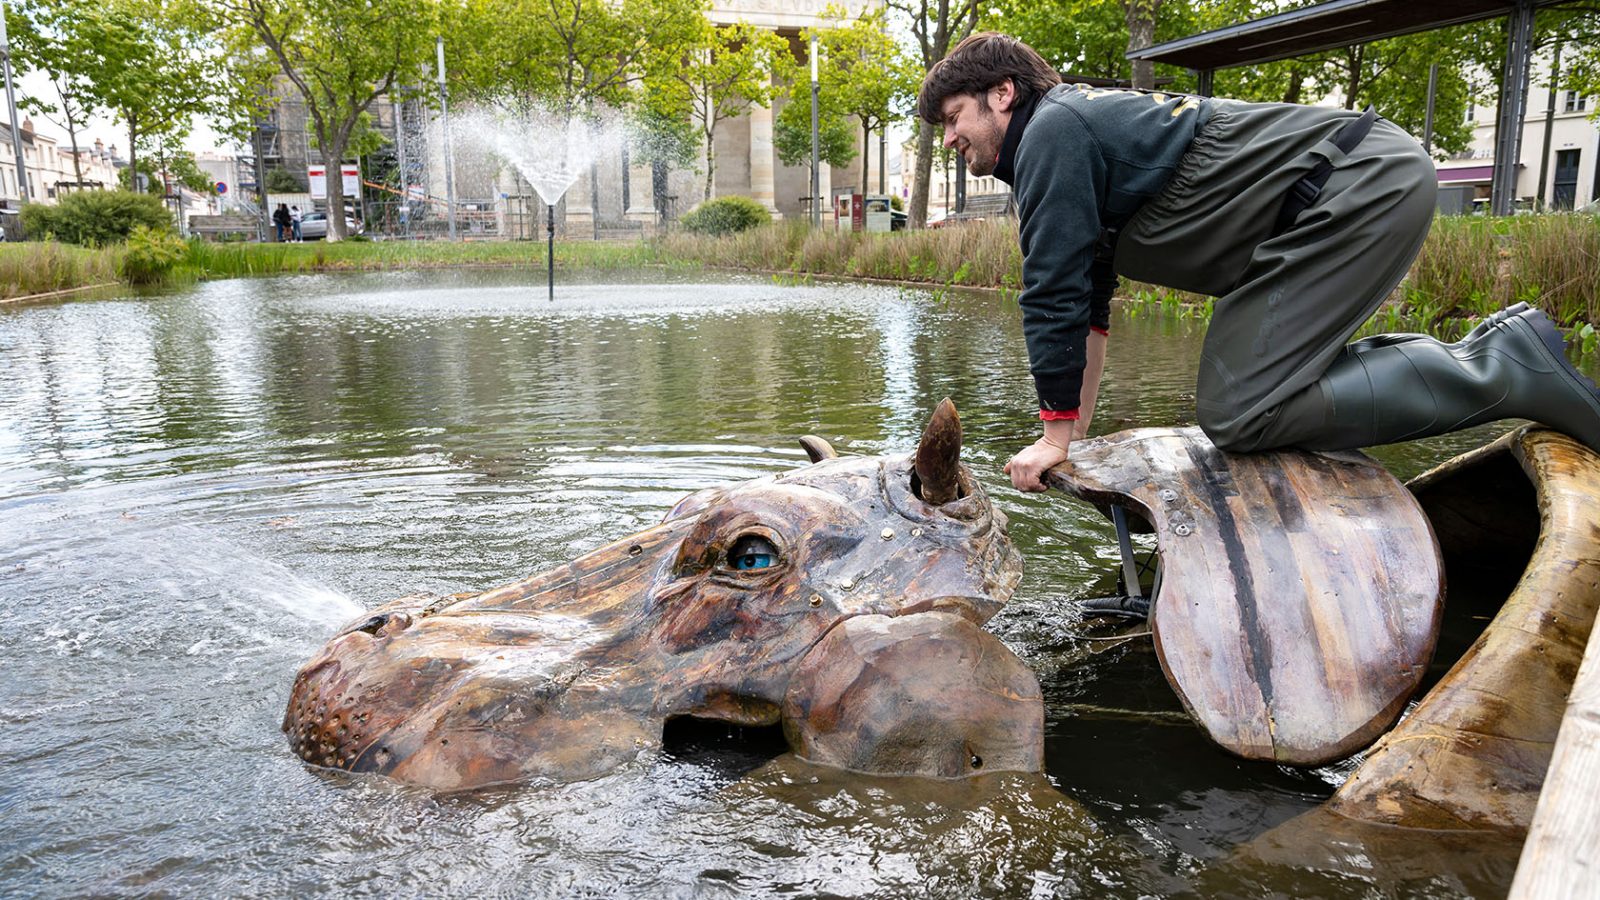 A technician mounted on the back of the mechanical hippopotamus of the Place Napoléon Animals in La Roche-sur-Yon